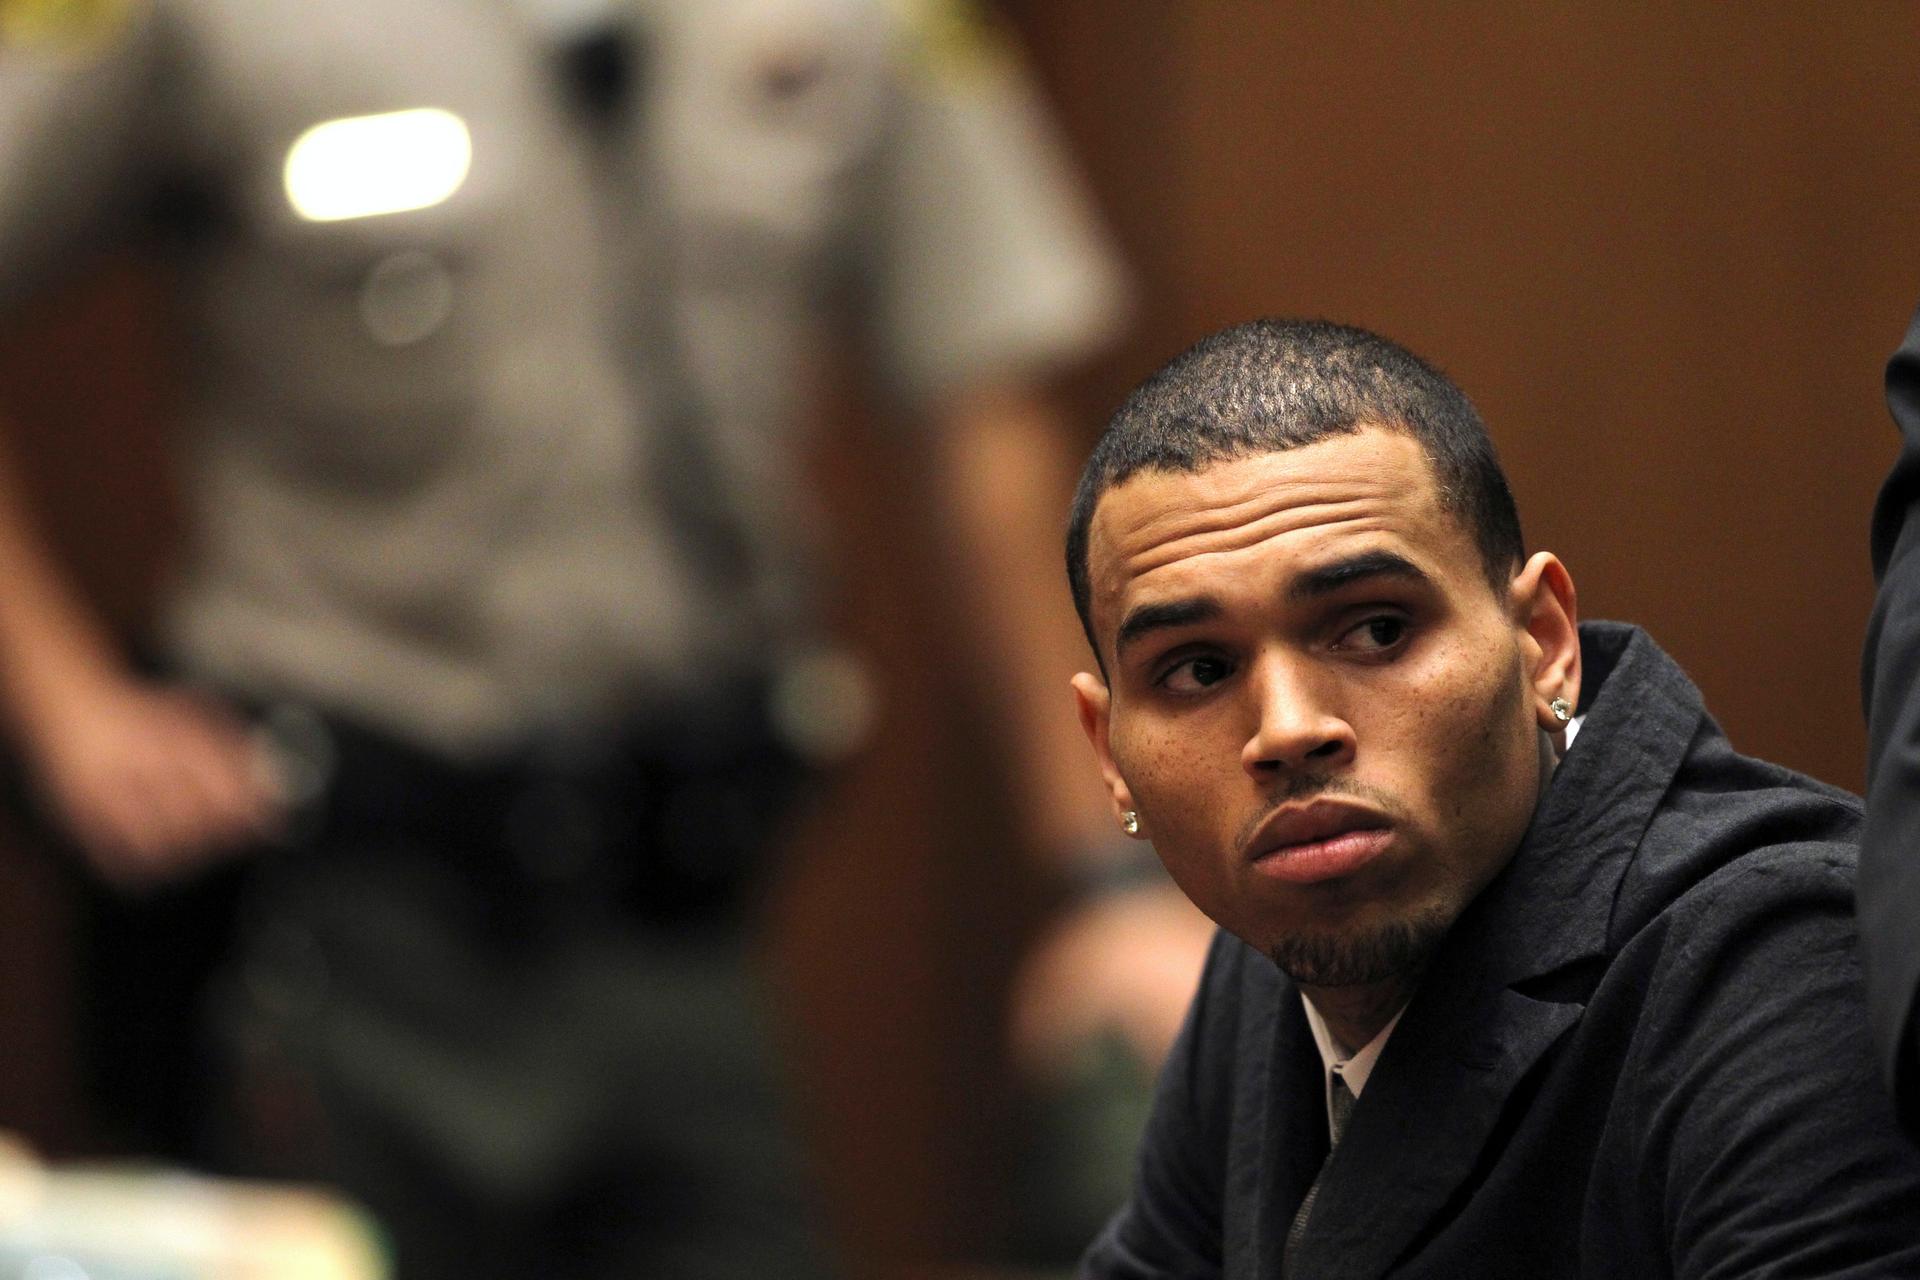 Singer Chris Brown attends a hearing at Clara Shortridge Foltz Criminal Justice Center in Los Angeles, California February 6, 2013.